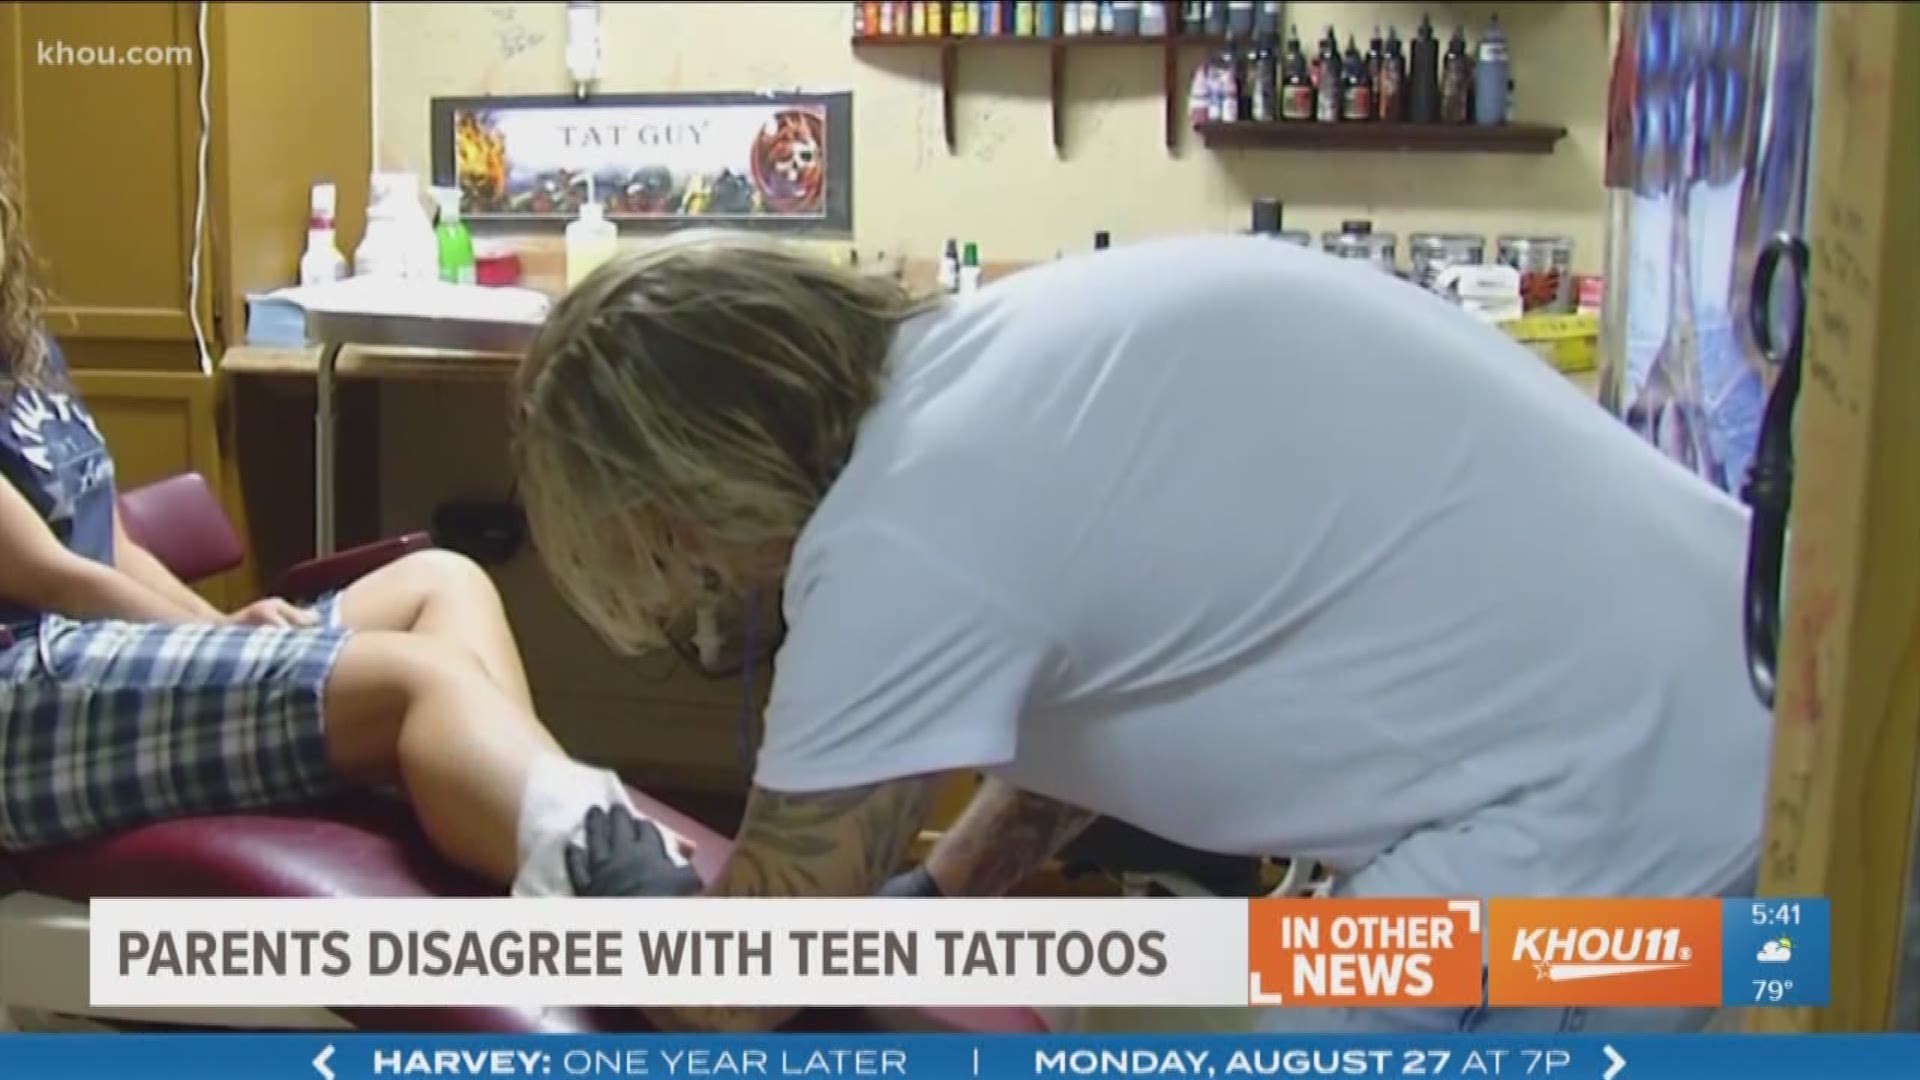 78% of parents disapprove of tattoos